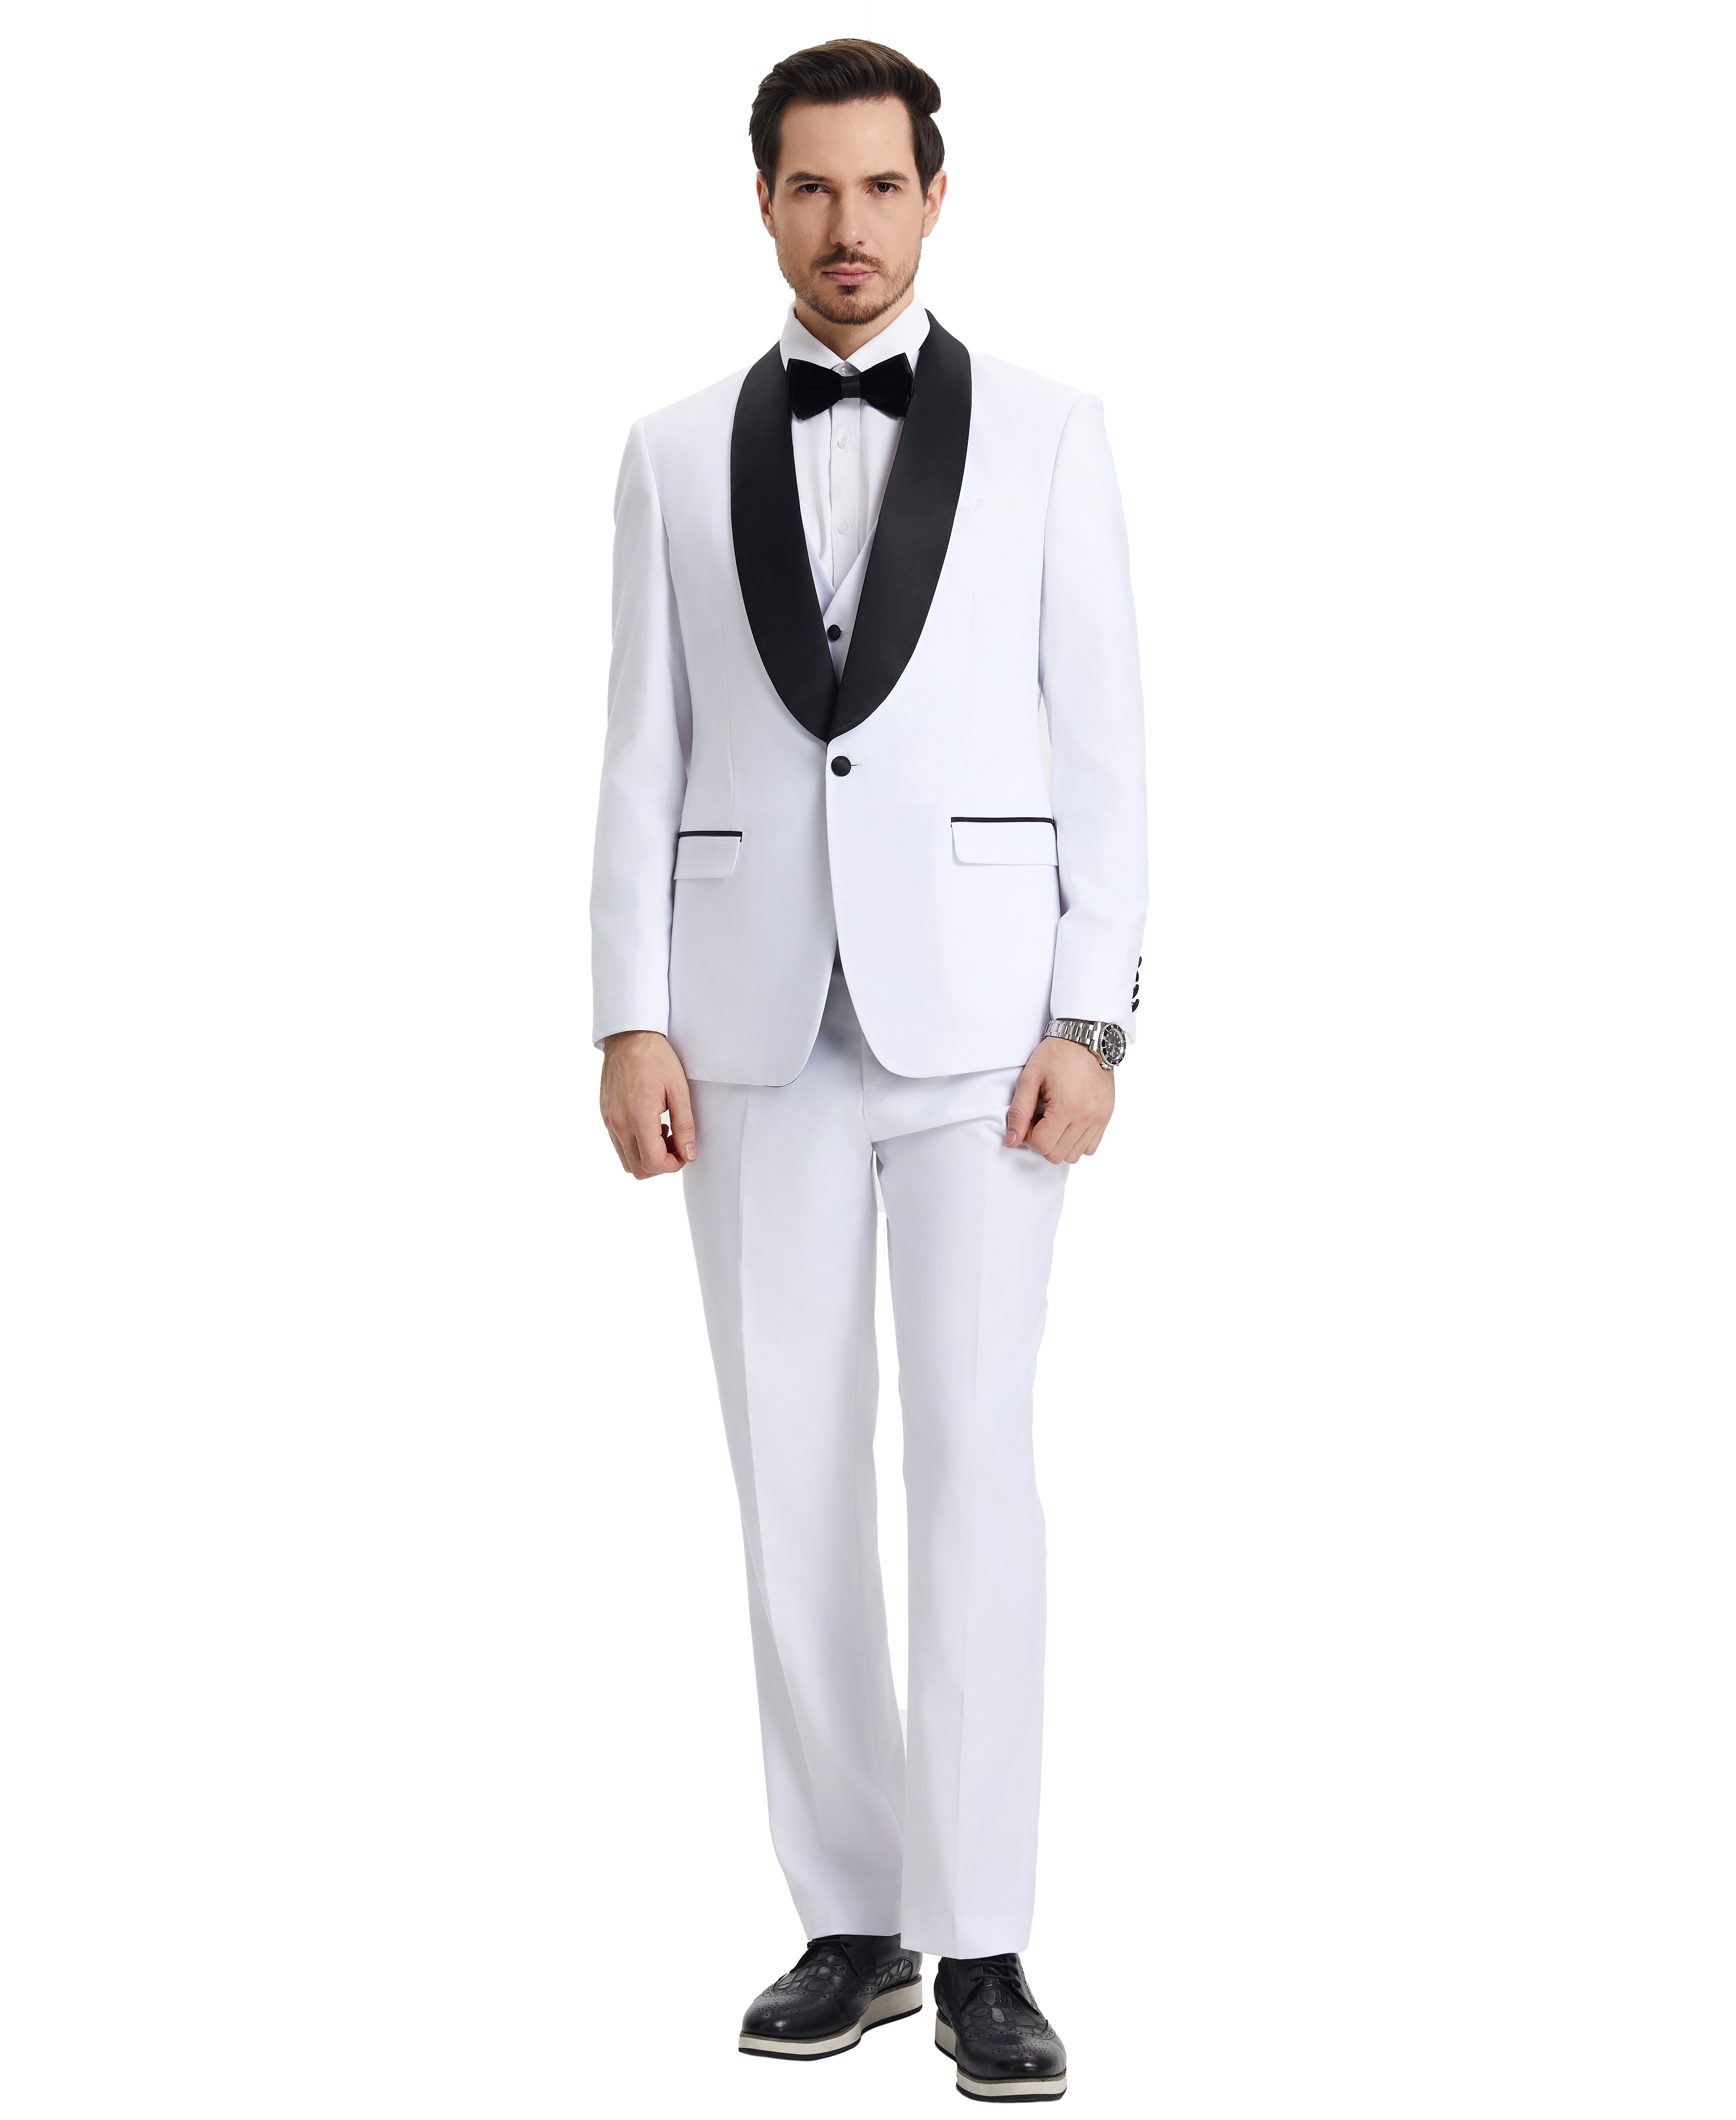 Stacy Adams Hybrid-Fit Vested Tuxedo, Snow White